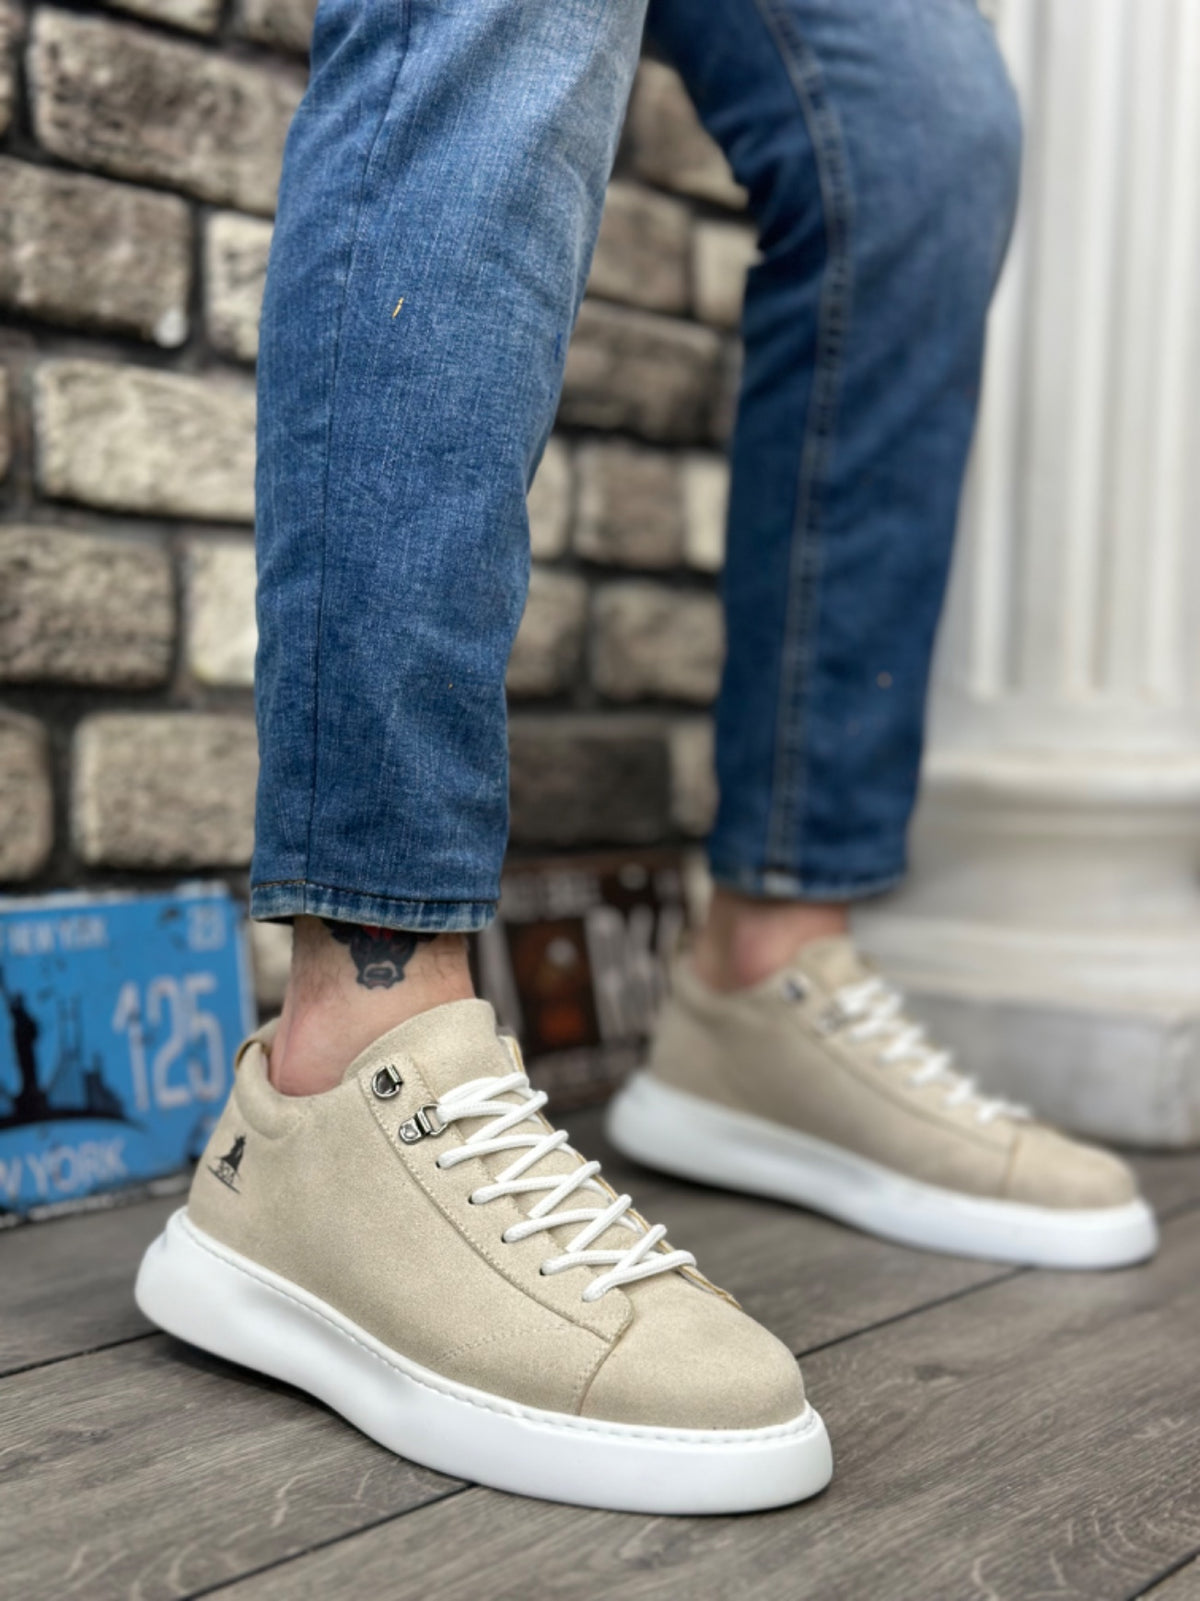 BA0331 Lace-Up Men's High Sole Cream Suede White Sole Sports Shoes - STREETMODE ™